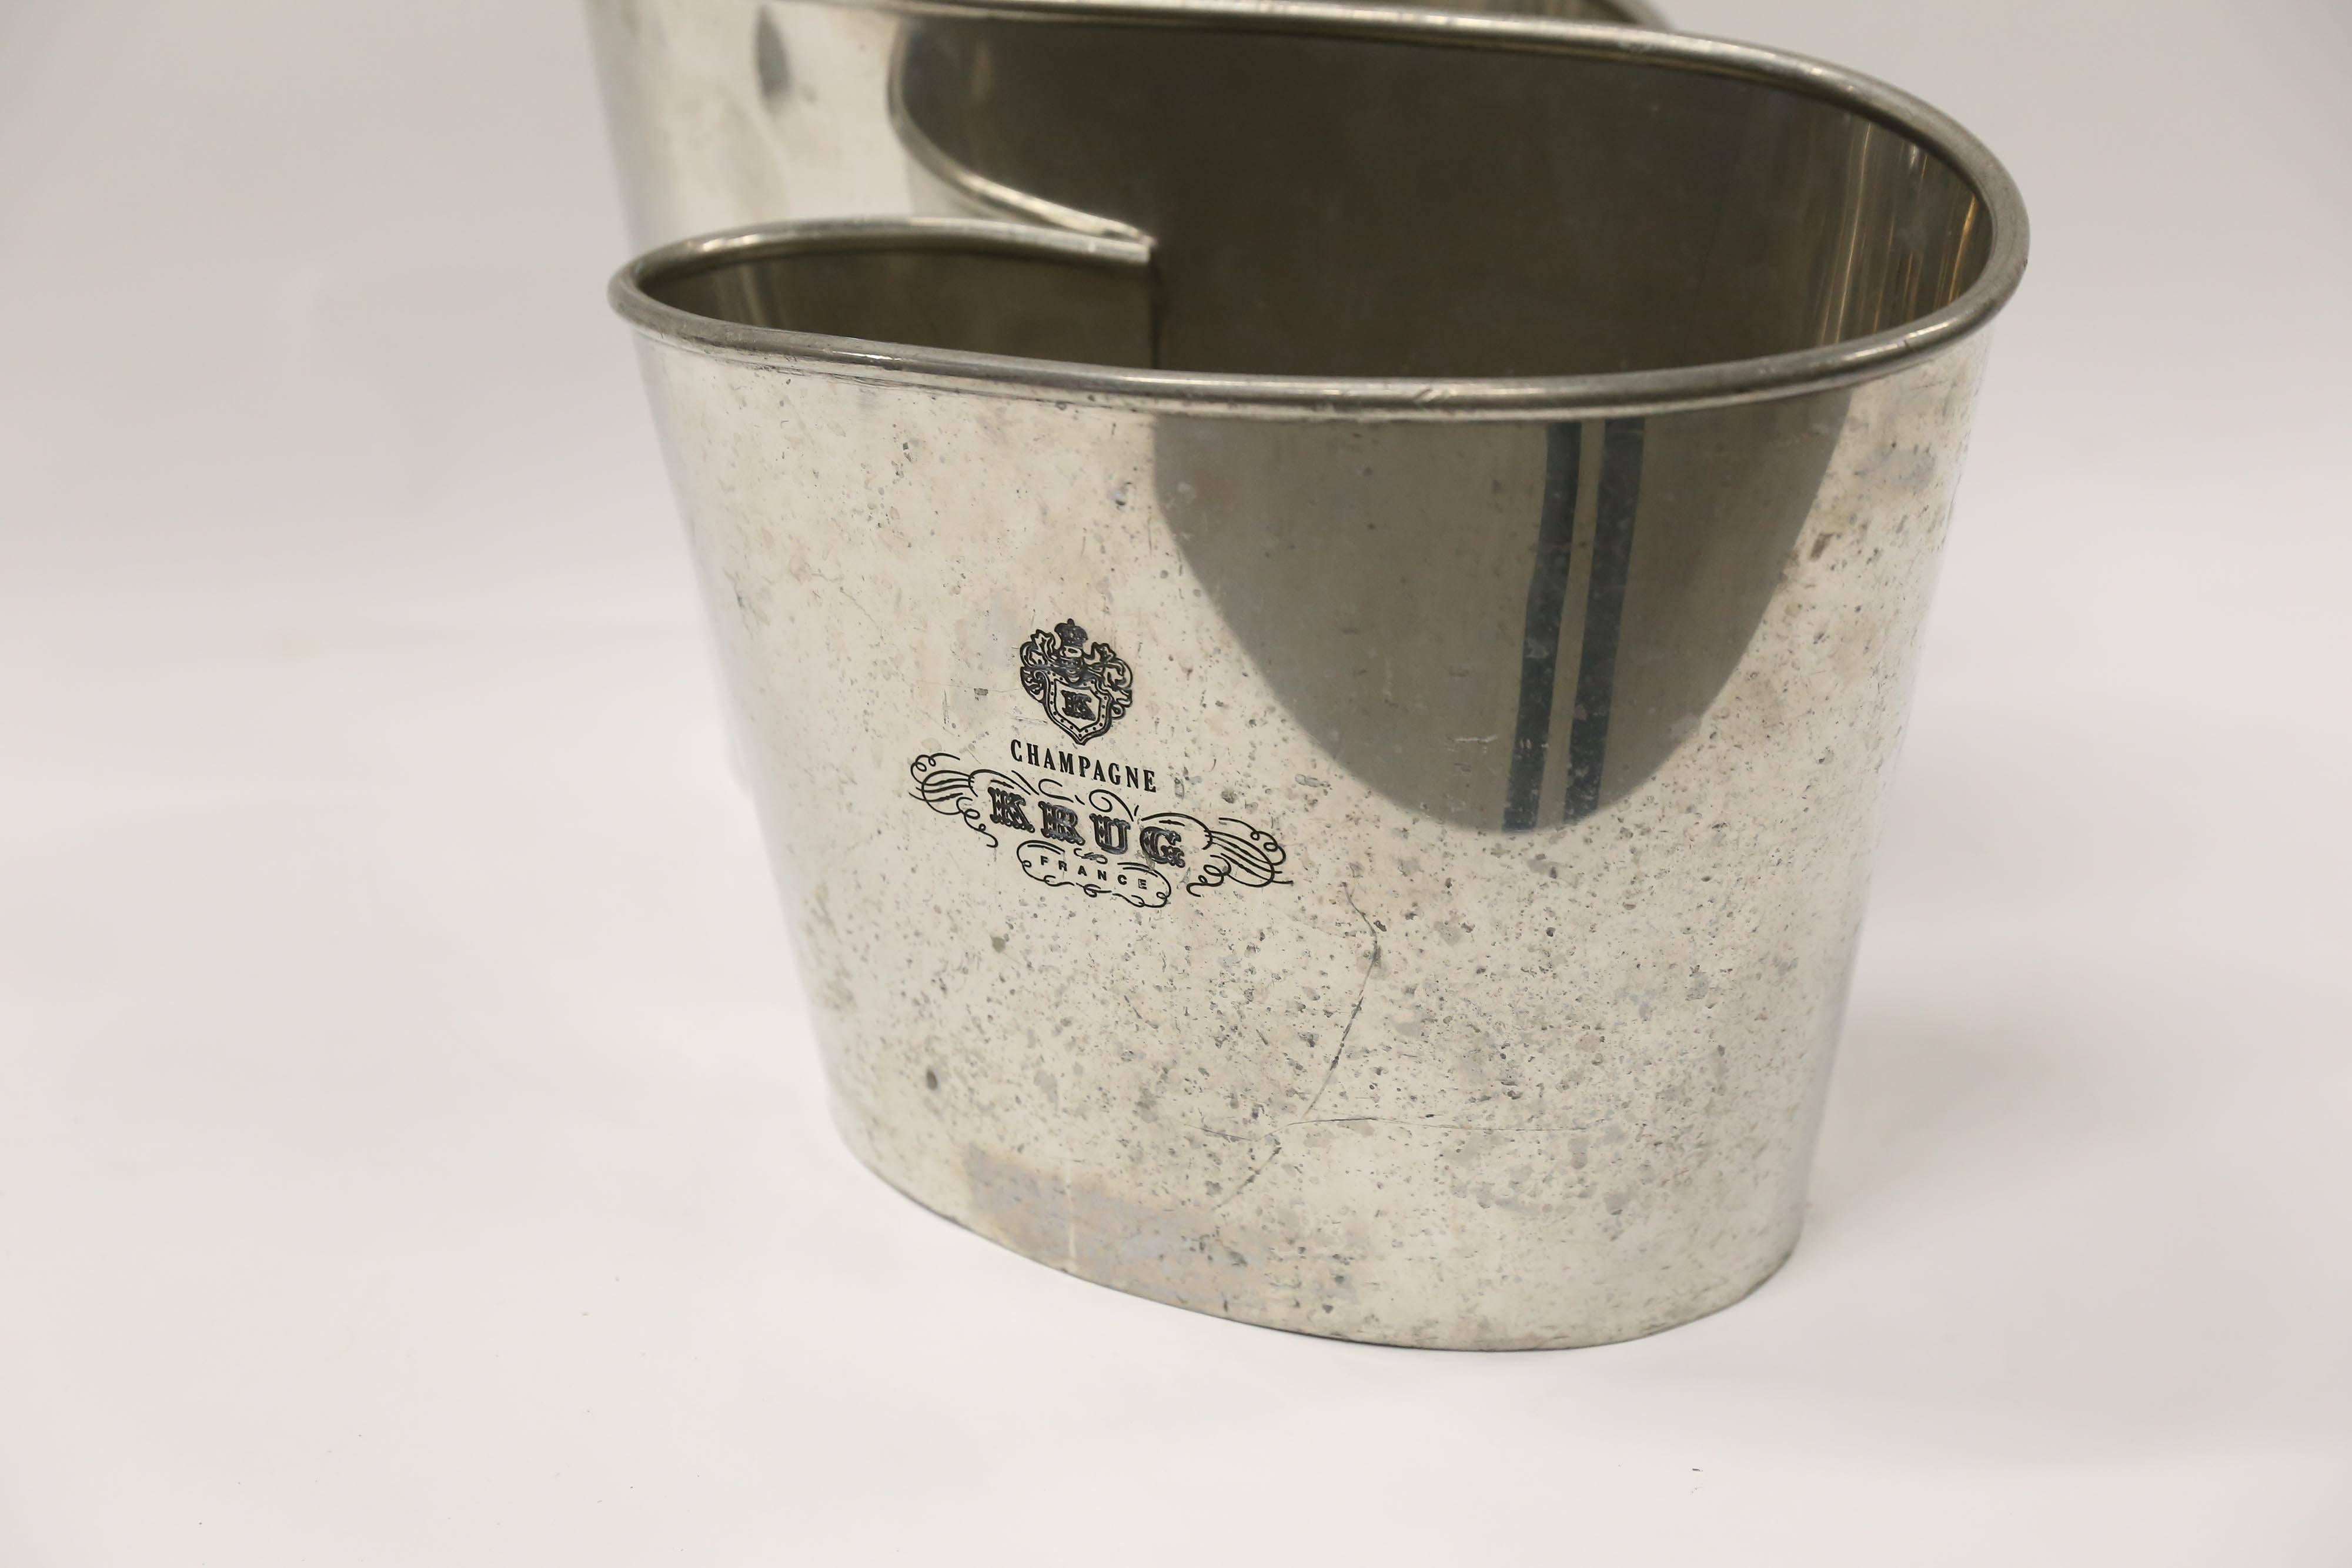 An infinity shaped double champagne cooler from the House of Krug to hold and chill your champagne or other wines. Made of pewter, the Krug emblem is engraved on both sides. Scratches and pitting on major surfaces. One of the harder-to-find Krug